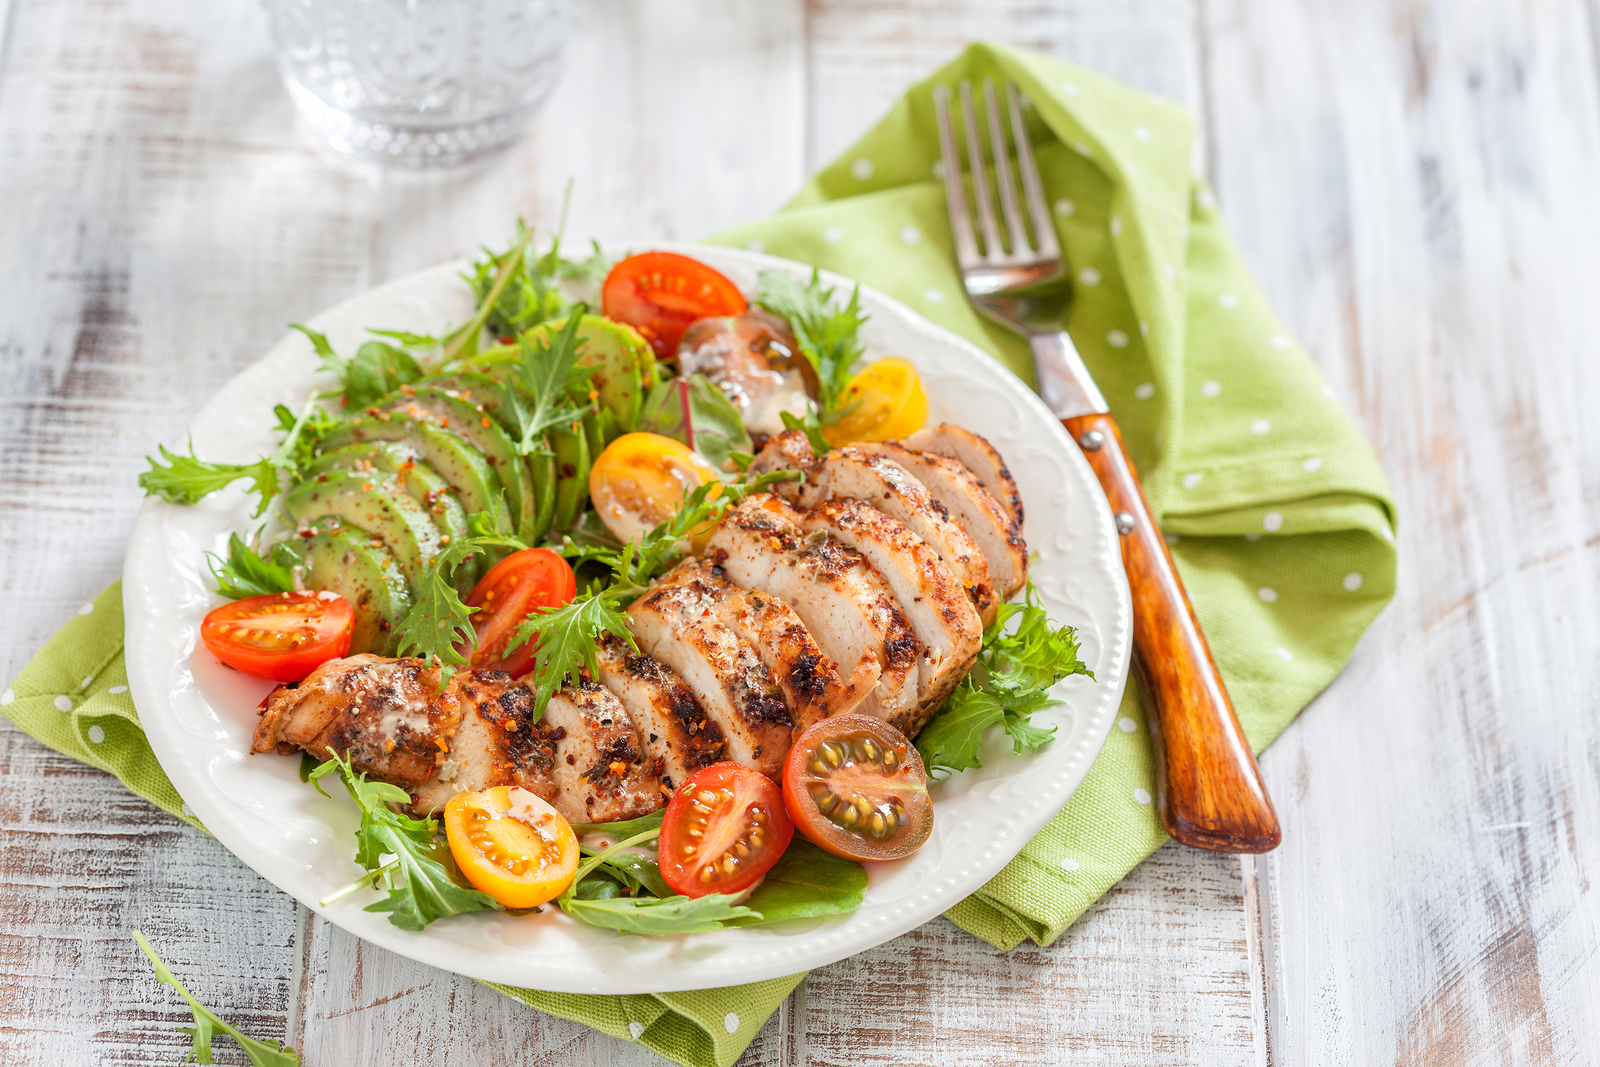 Sample Ketogenic Diet Meal Plan - Healthy food. Salad plate with colorful tomatoes, chicken breast and avocado